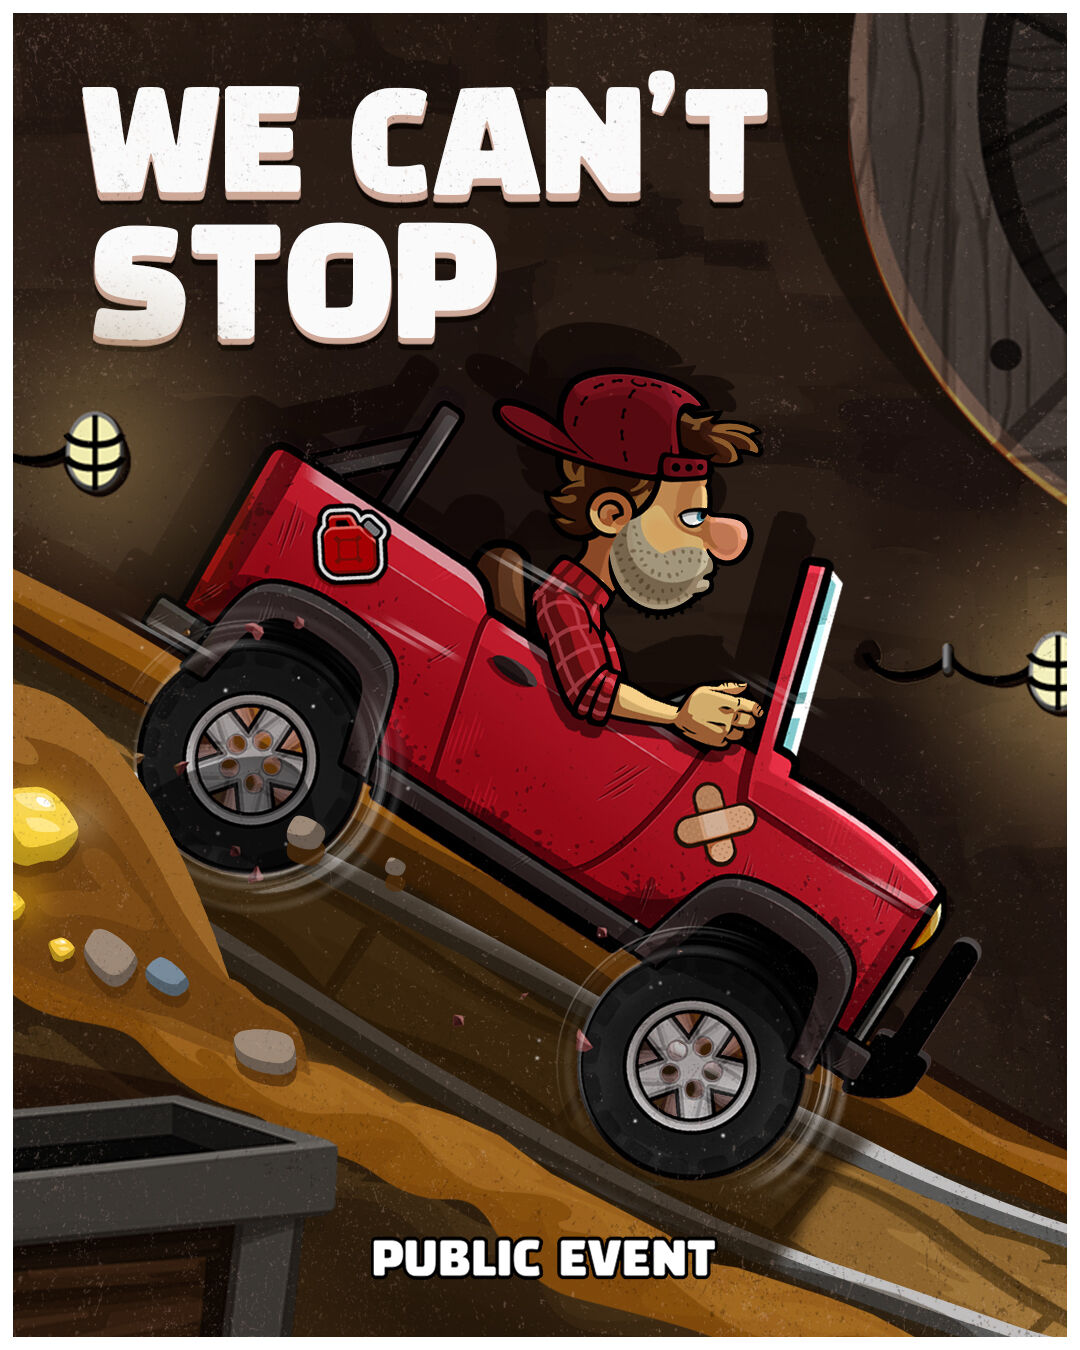 Hill Climb Racing - The adventure update for Hill Climb Racing 2 is out  now! Check your app store and then go earn yourself some fancy hats!